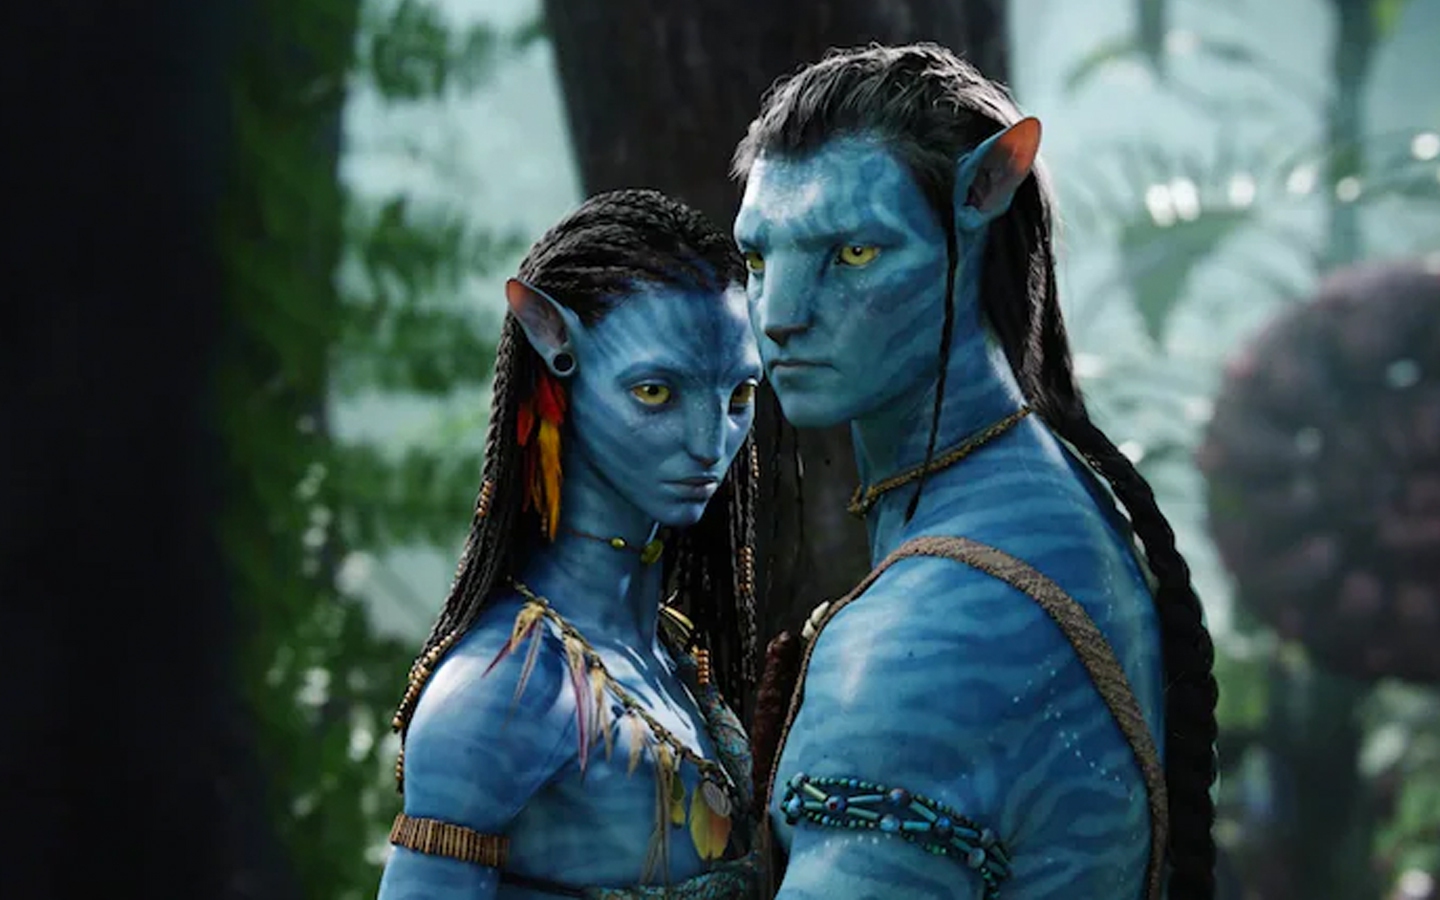 What’s special about Avatar 2’s official trailer released to the audience?